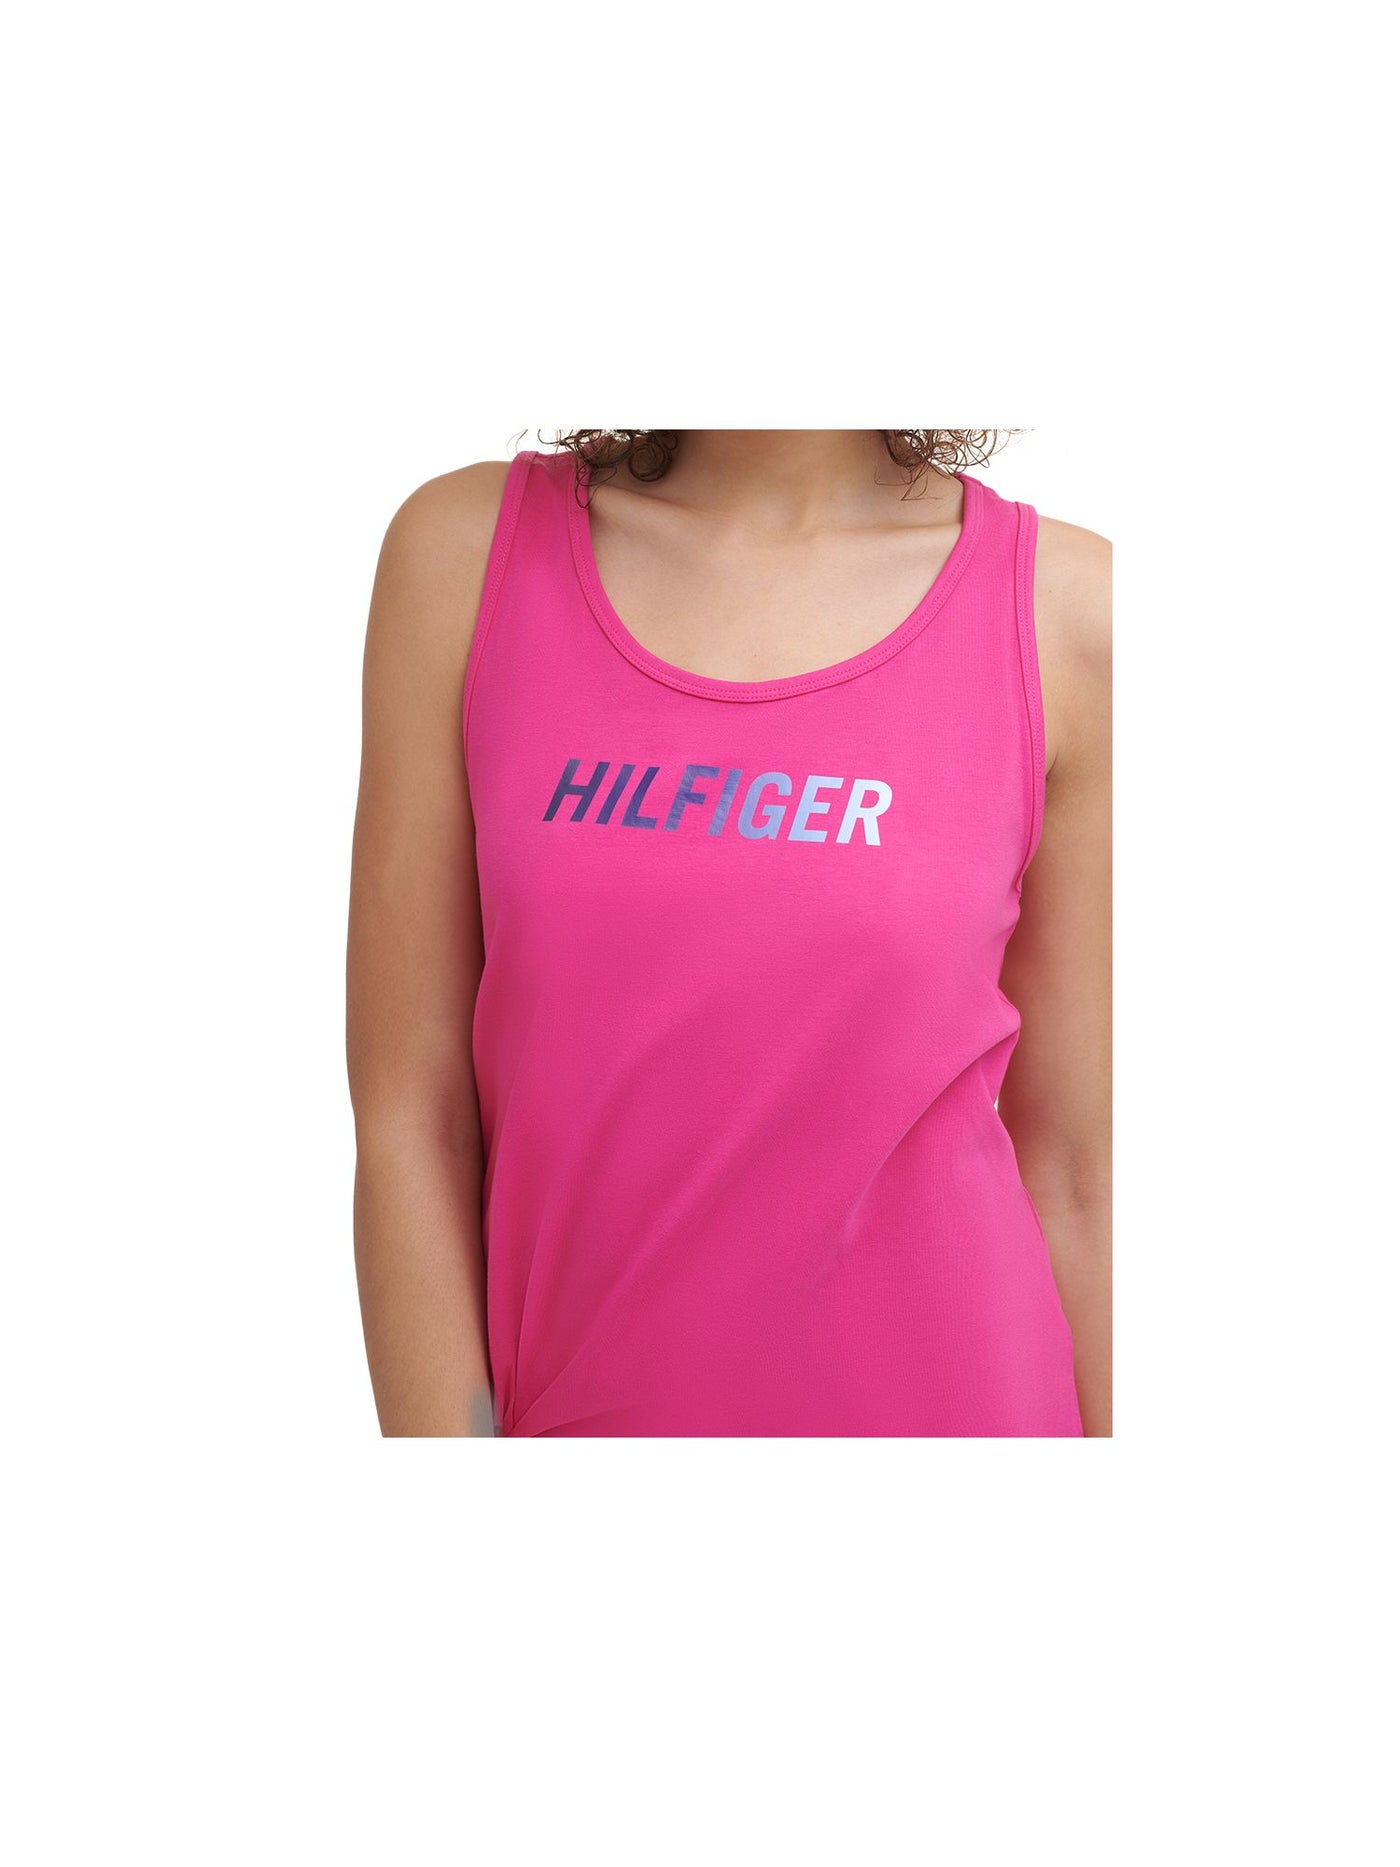 TOMMY HILFIGER SPORT Womens Pink Cotton Blend Logo Graphic Sleeveless Scoop Neck Active Wear Tank Top XS